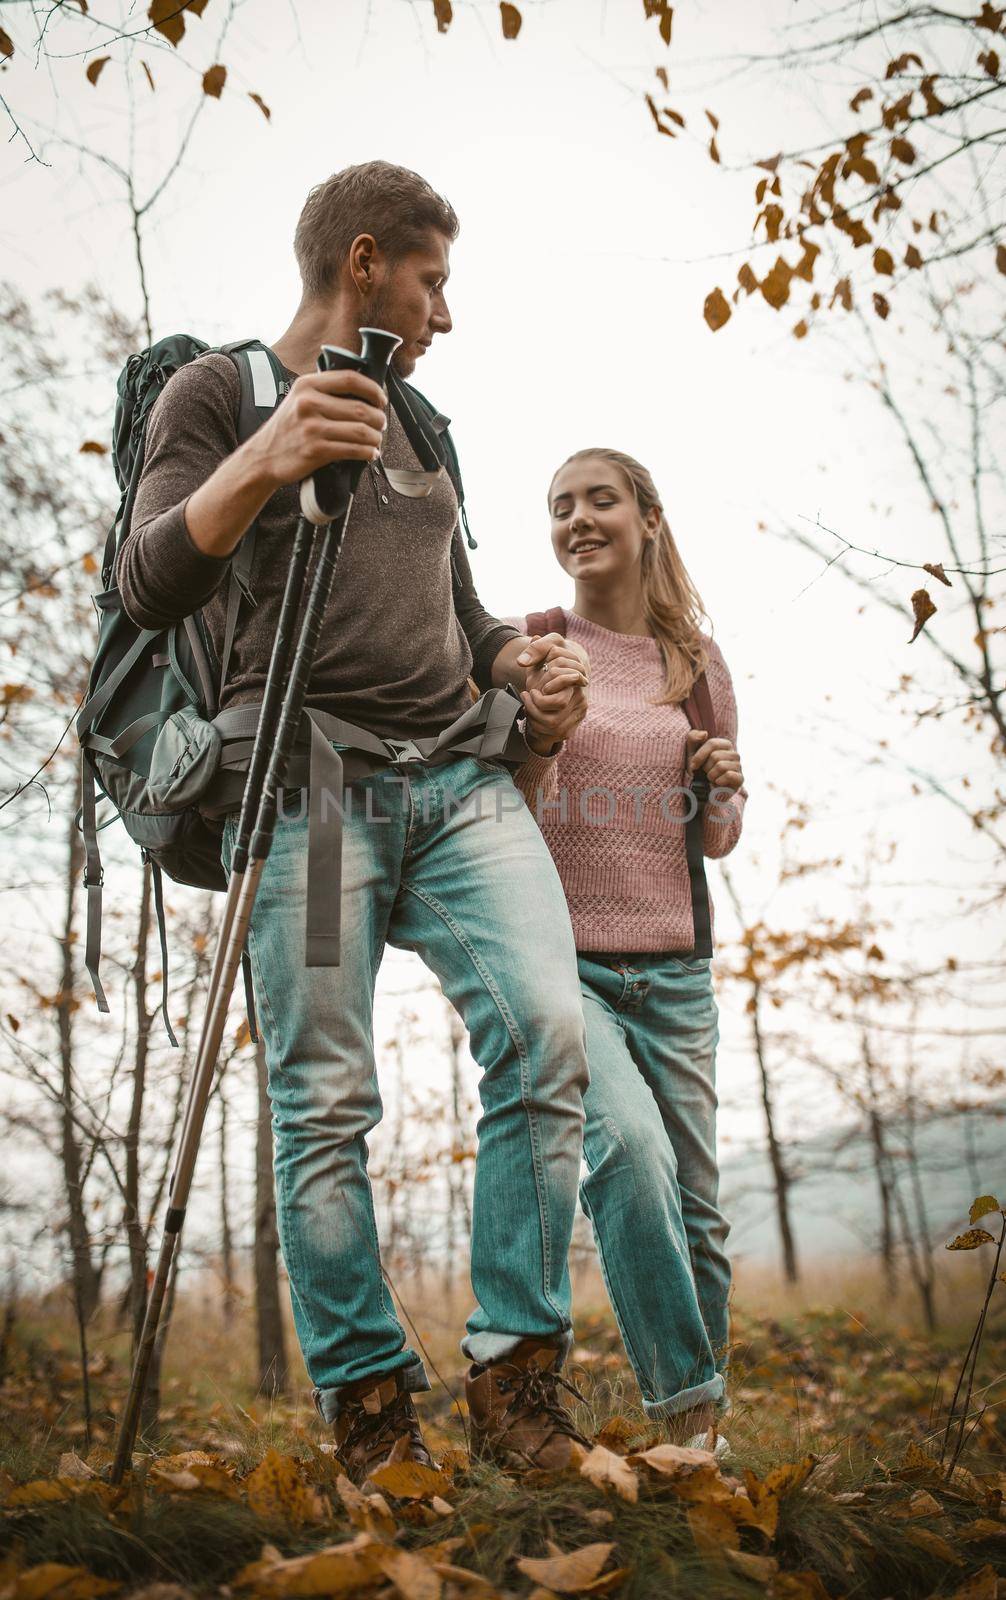 Tourists Backpackers Walking In Autumn Nature On Fallen Leaves And Green Grass, Focus On Man Holding His Woman's Hand And Hiking Poles In Other Hand, Walk With Backpacks Concept, Shot From Below